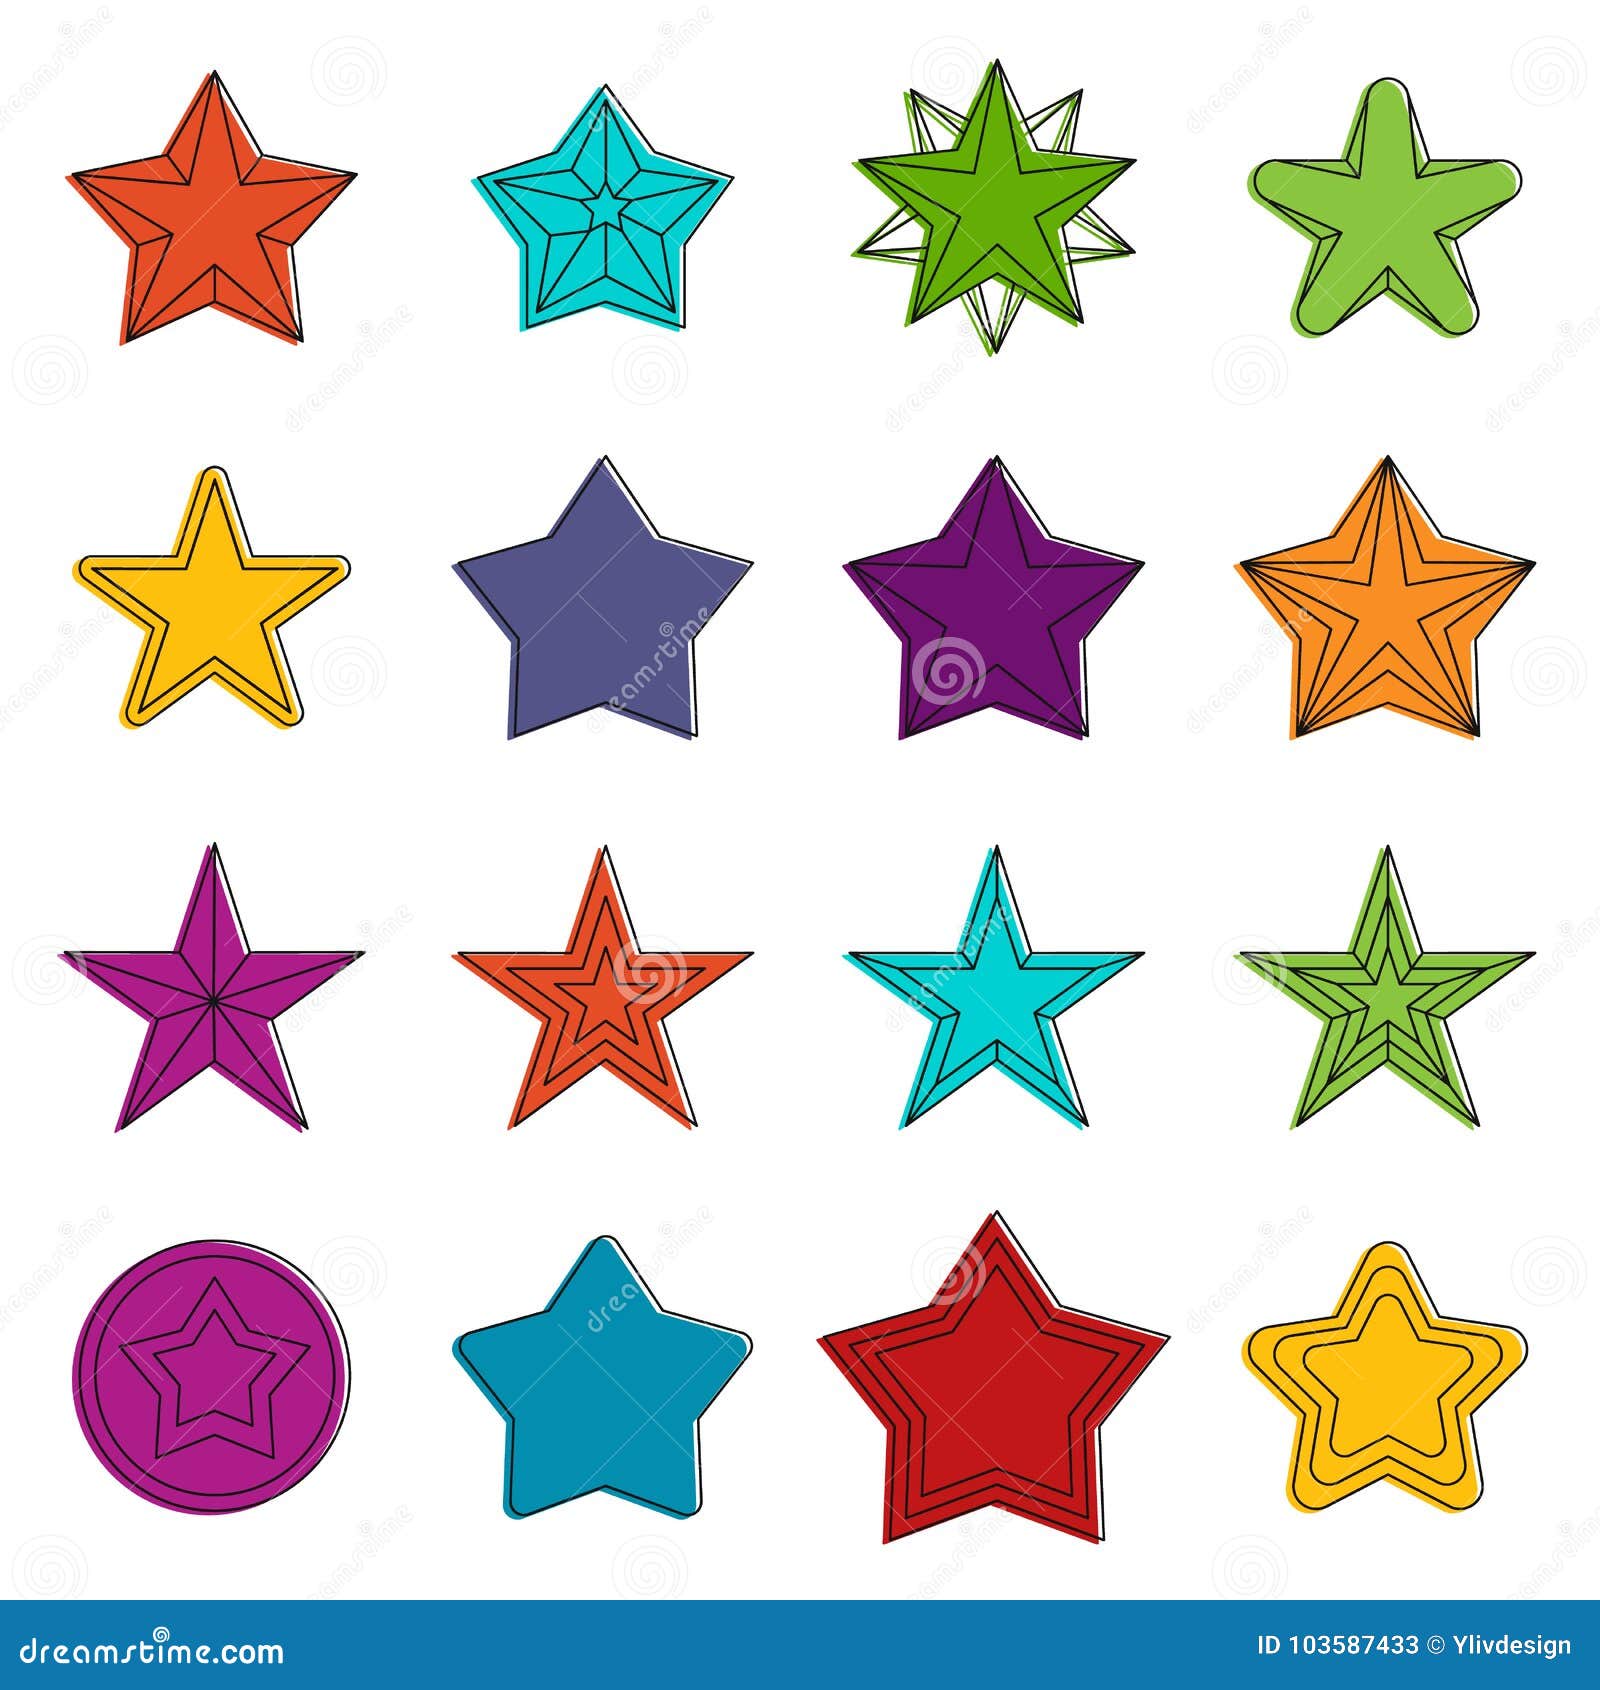 Star icons doodle set stock vector. Illustration of concept - 103587433